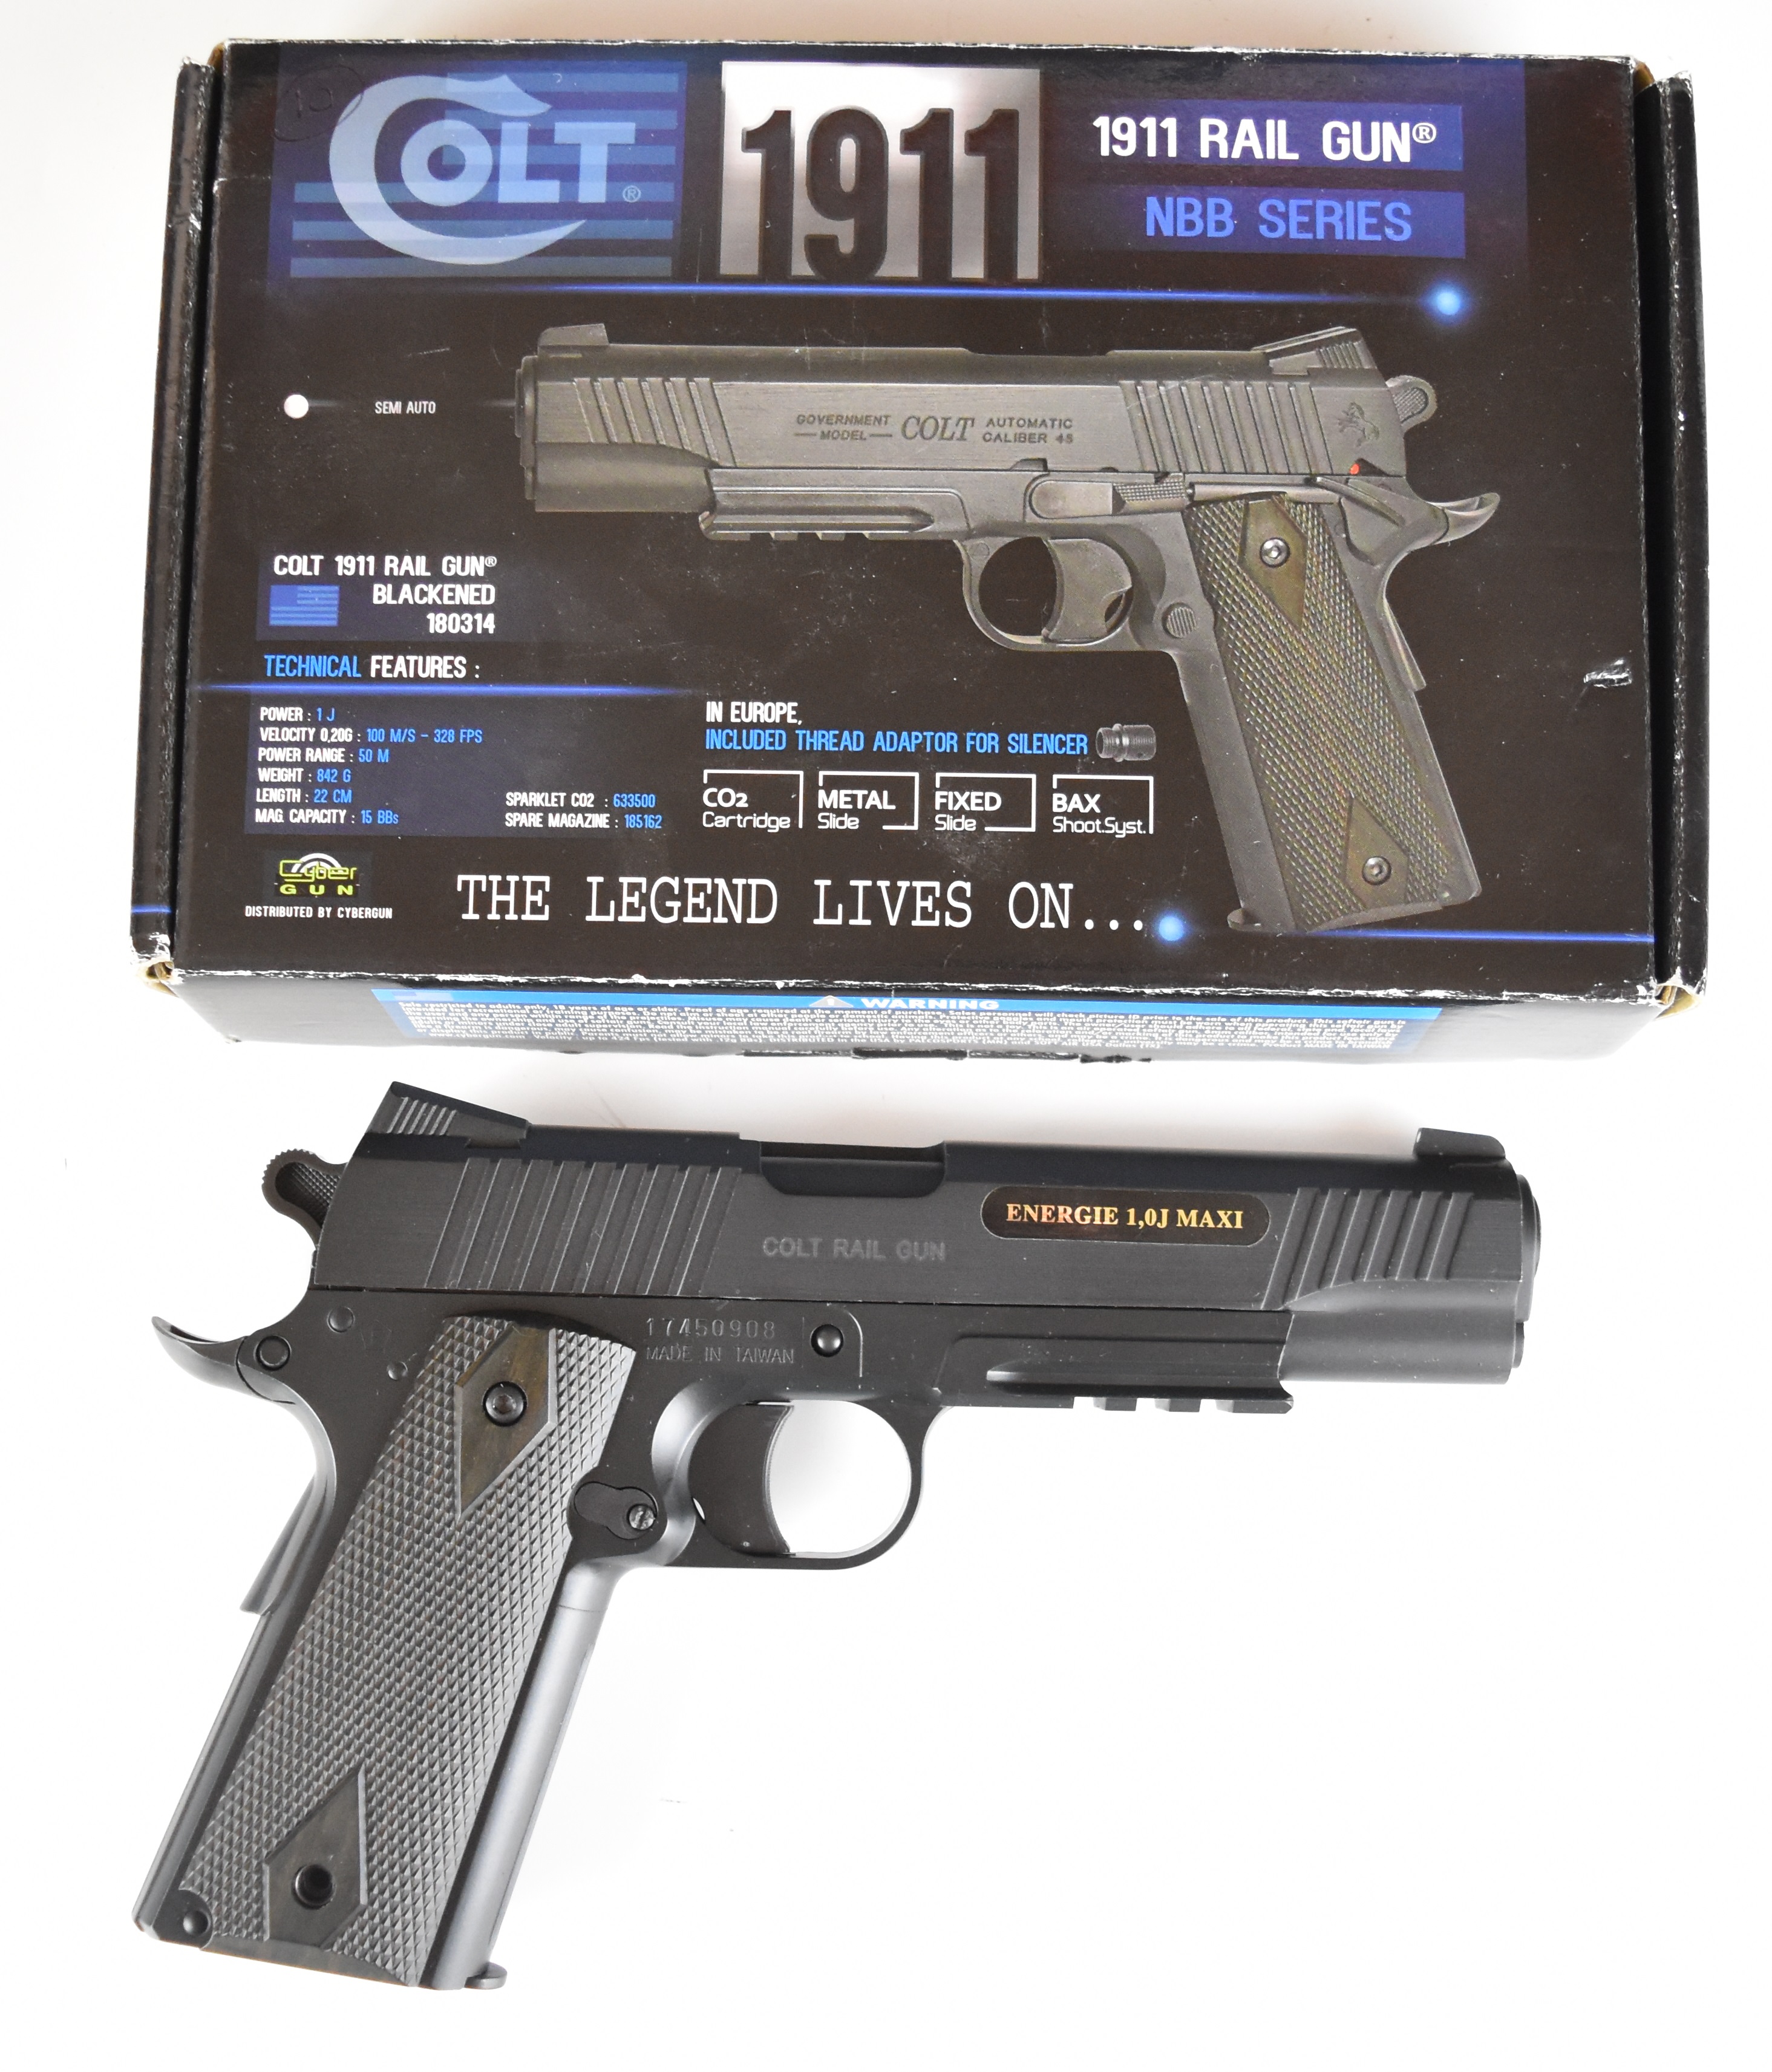 Colt 1911 Rail Gun NBB Series 6mm CO2 air pistol with chequered grips, 15 shot magazine and fixed